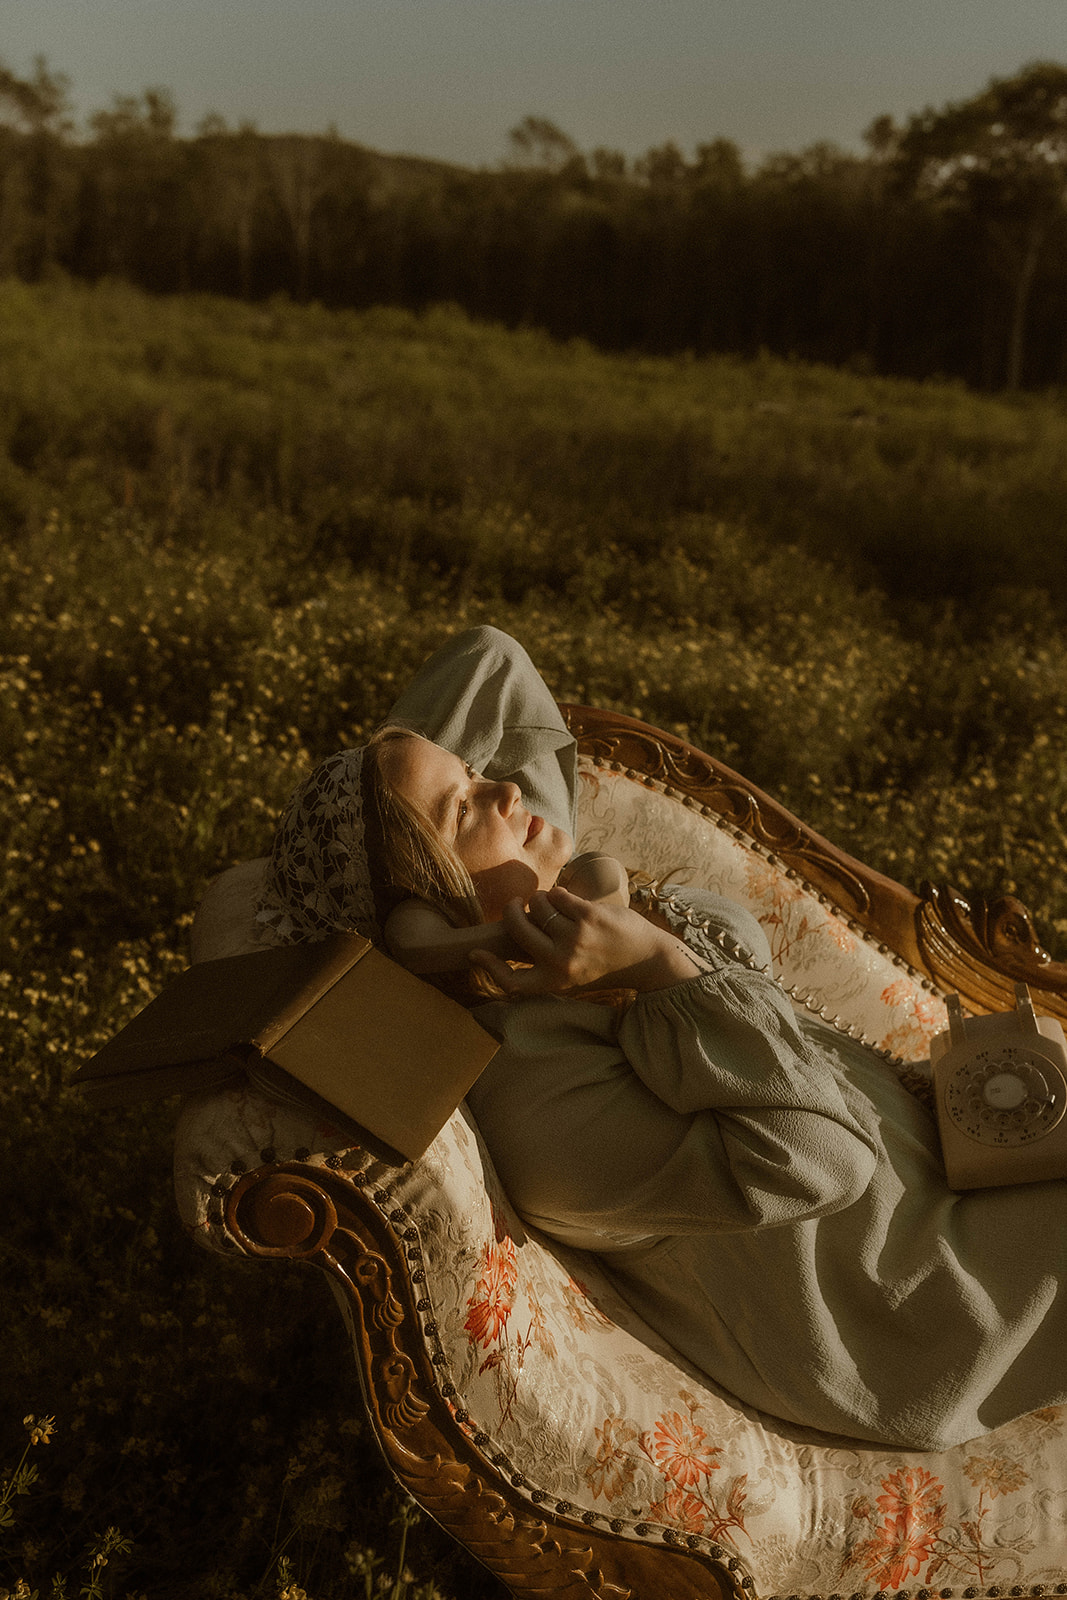 young girl poses with a vintage chaise for creative self portraits in a field